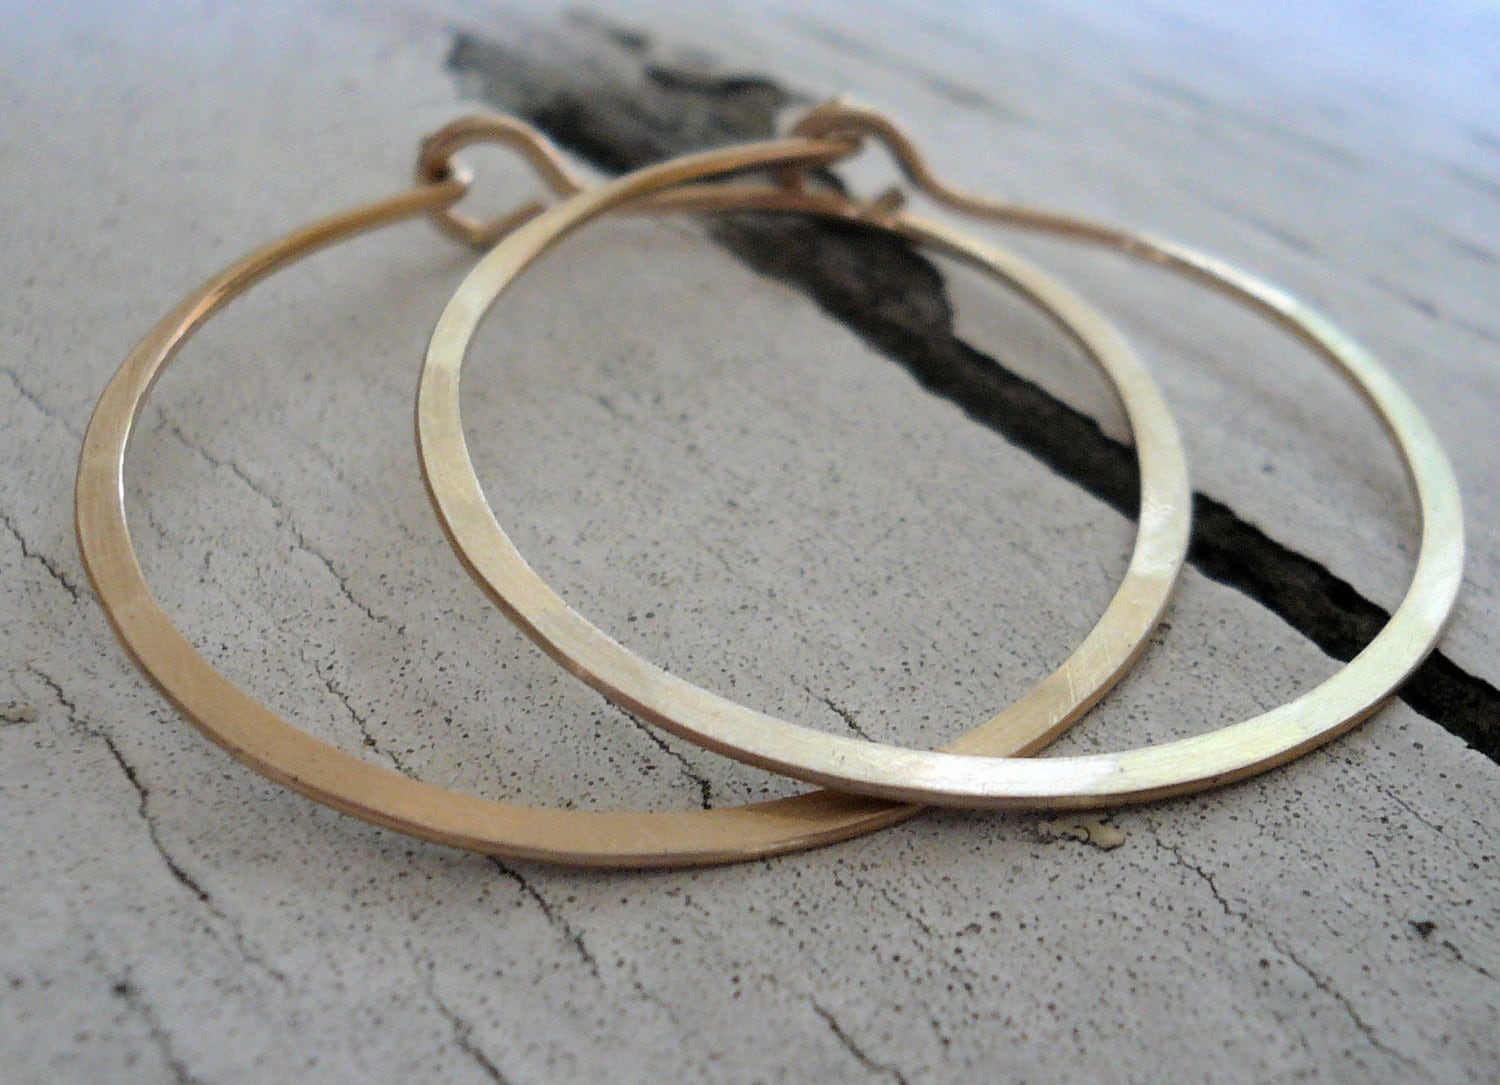 Gold Thin Rope Hoops – Devil's Details